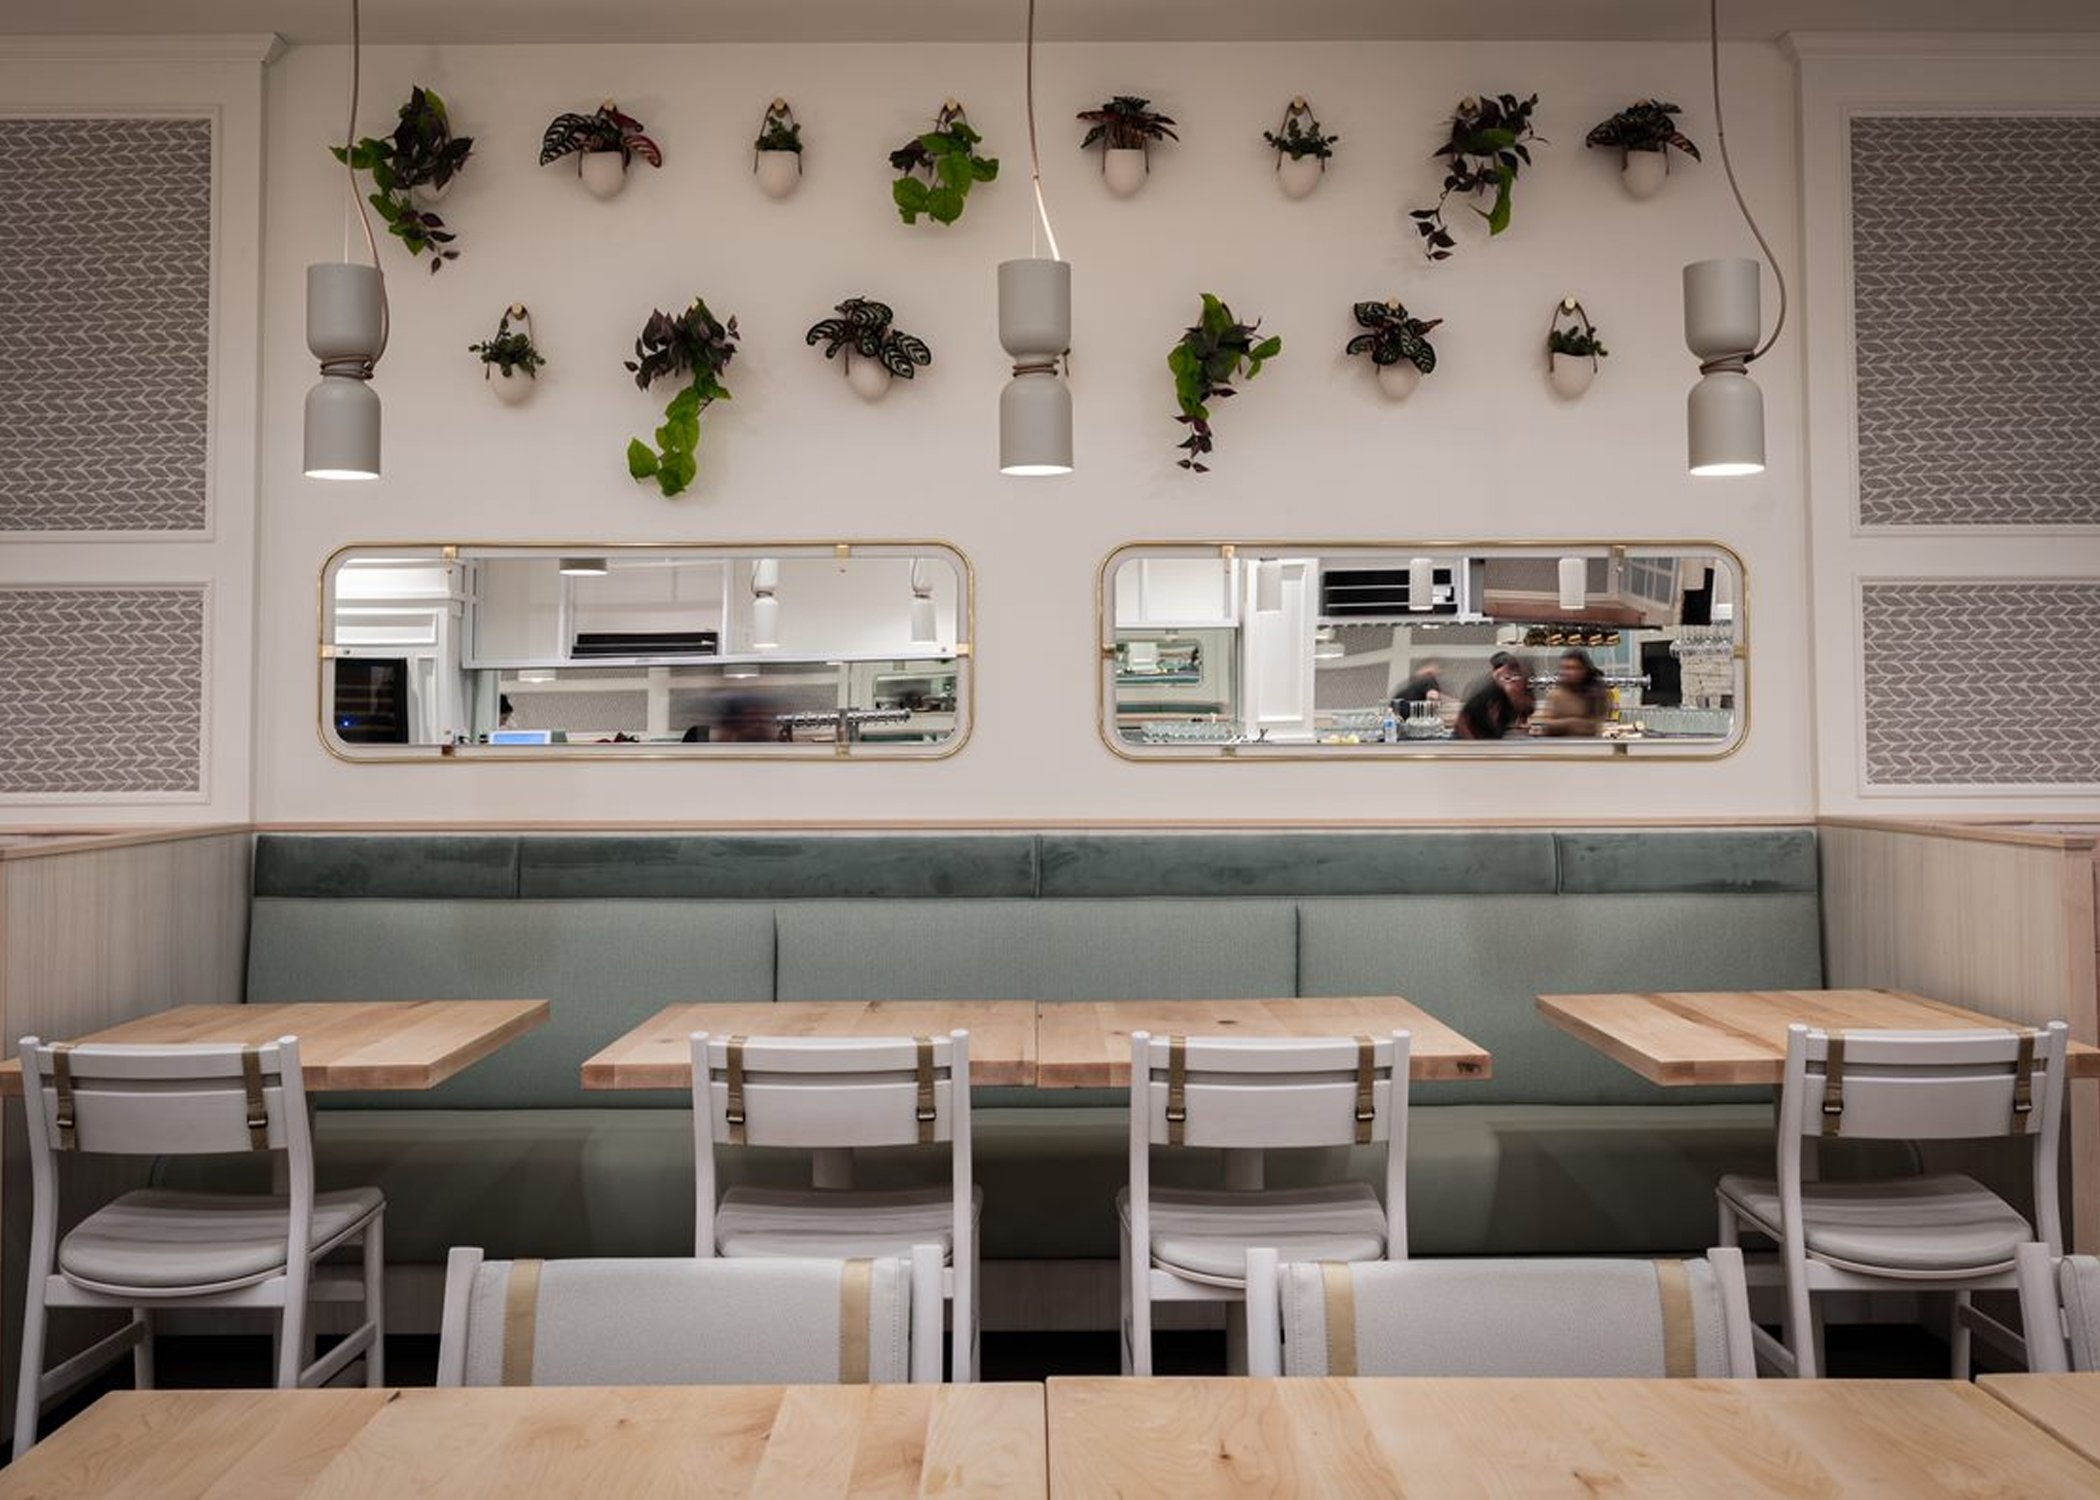 Wall with two rows of mounted plants above two windows into the kitchen. Pale blue booths below the mirrors with tables and Sigsbee chairs in a pale finish with khaki buckles, fully upholstered.